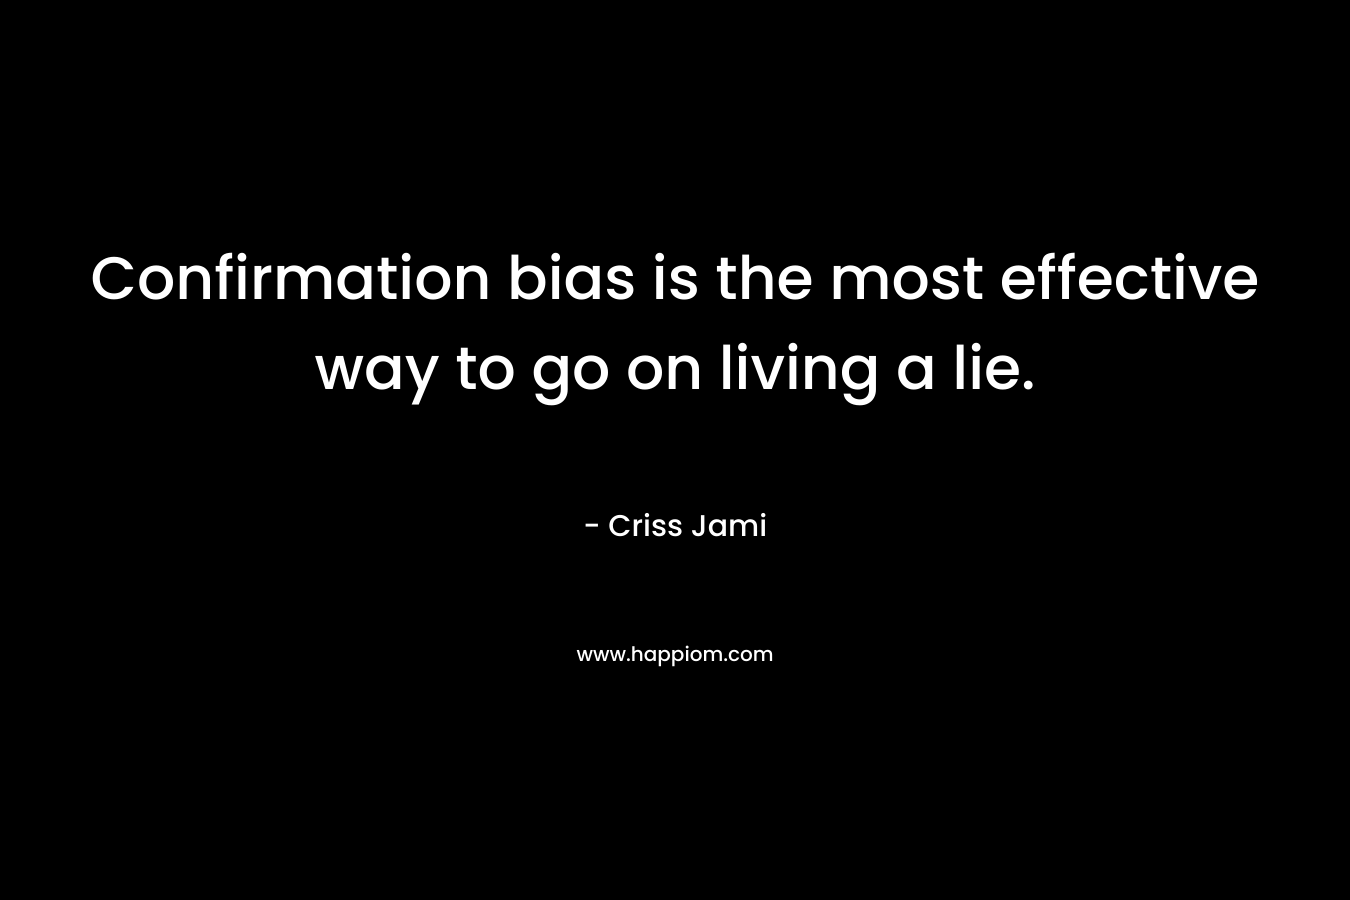 Confirmation bias is the most effective way to go on living a lie. – Criss Jami